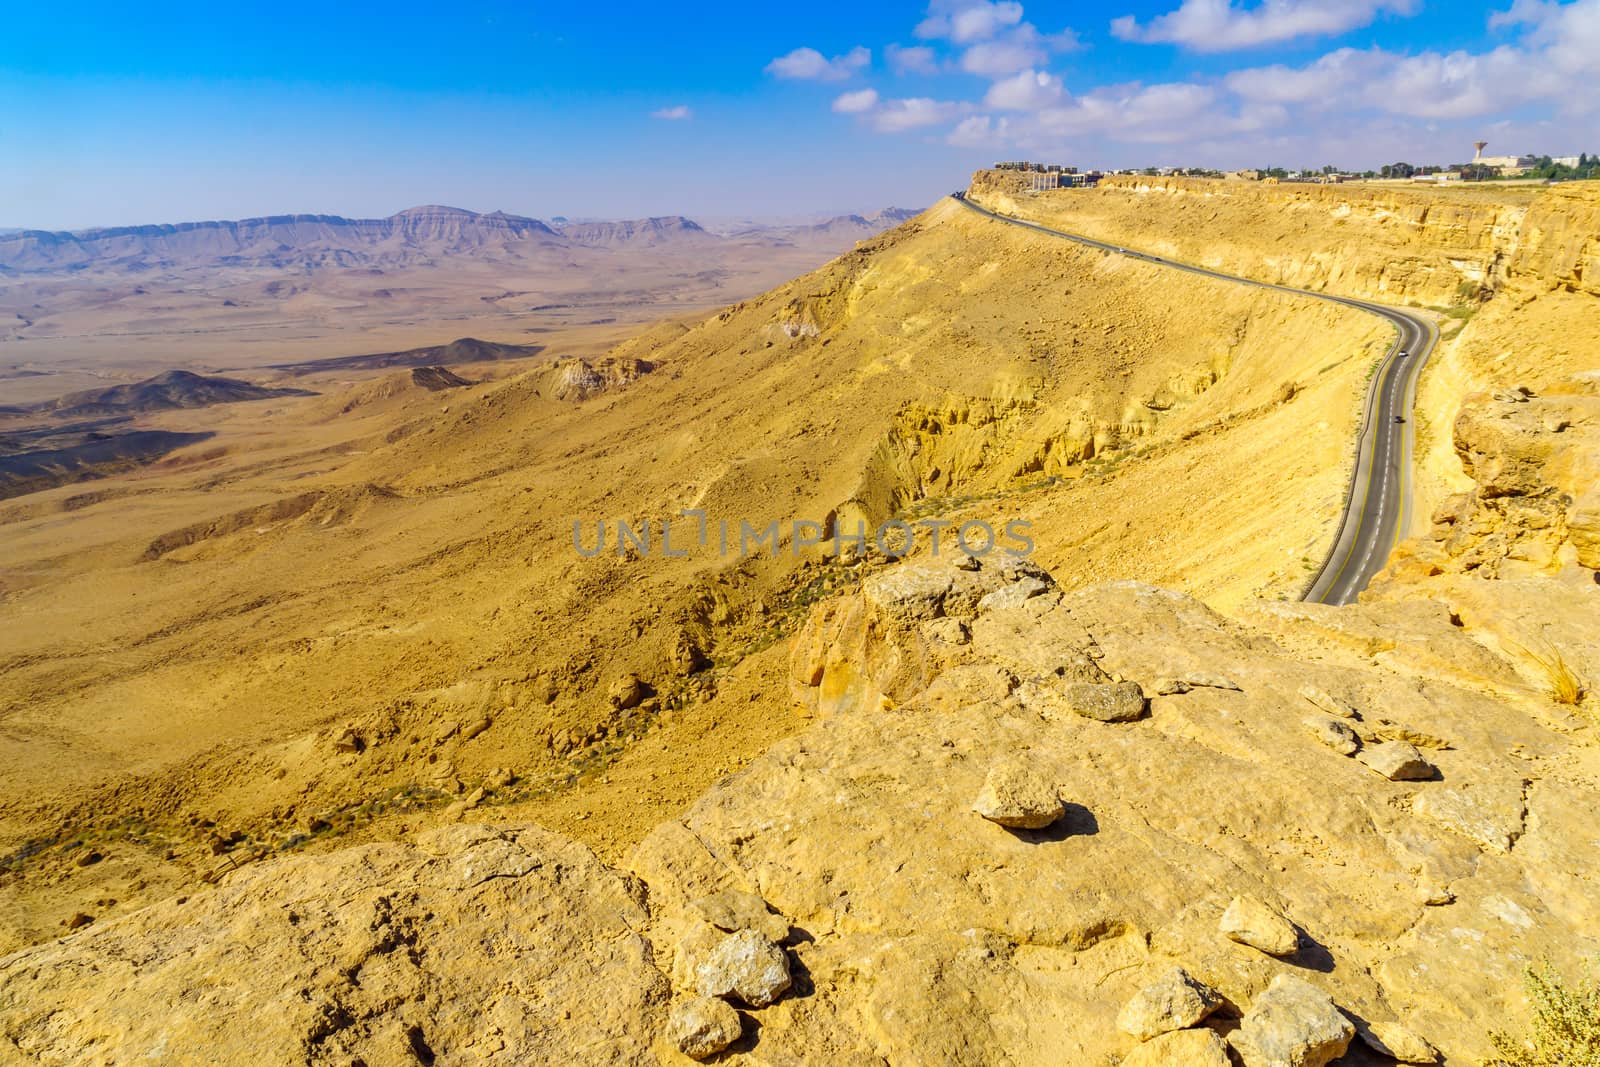 View of cliffs, landscape, and road in Makhtesh (crater) Ramon, the Negev Desert, Southern Israel